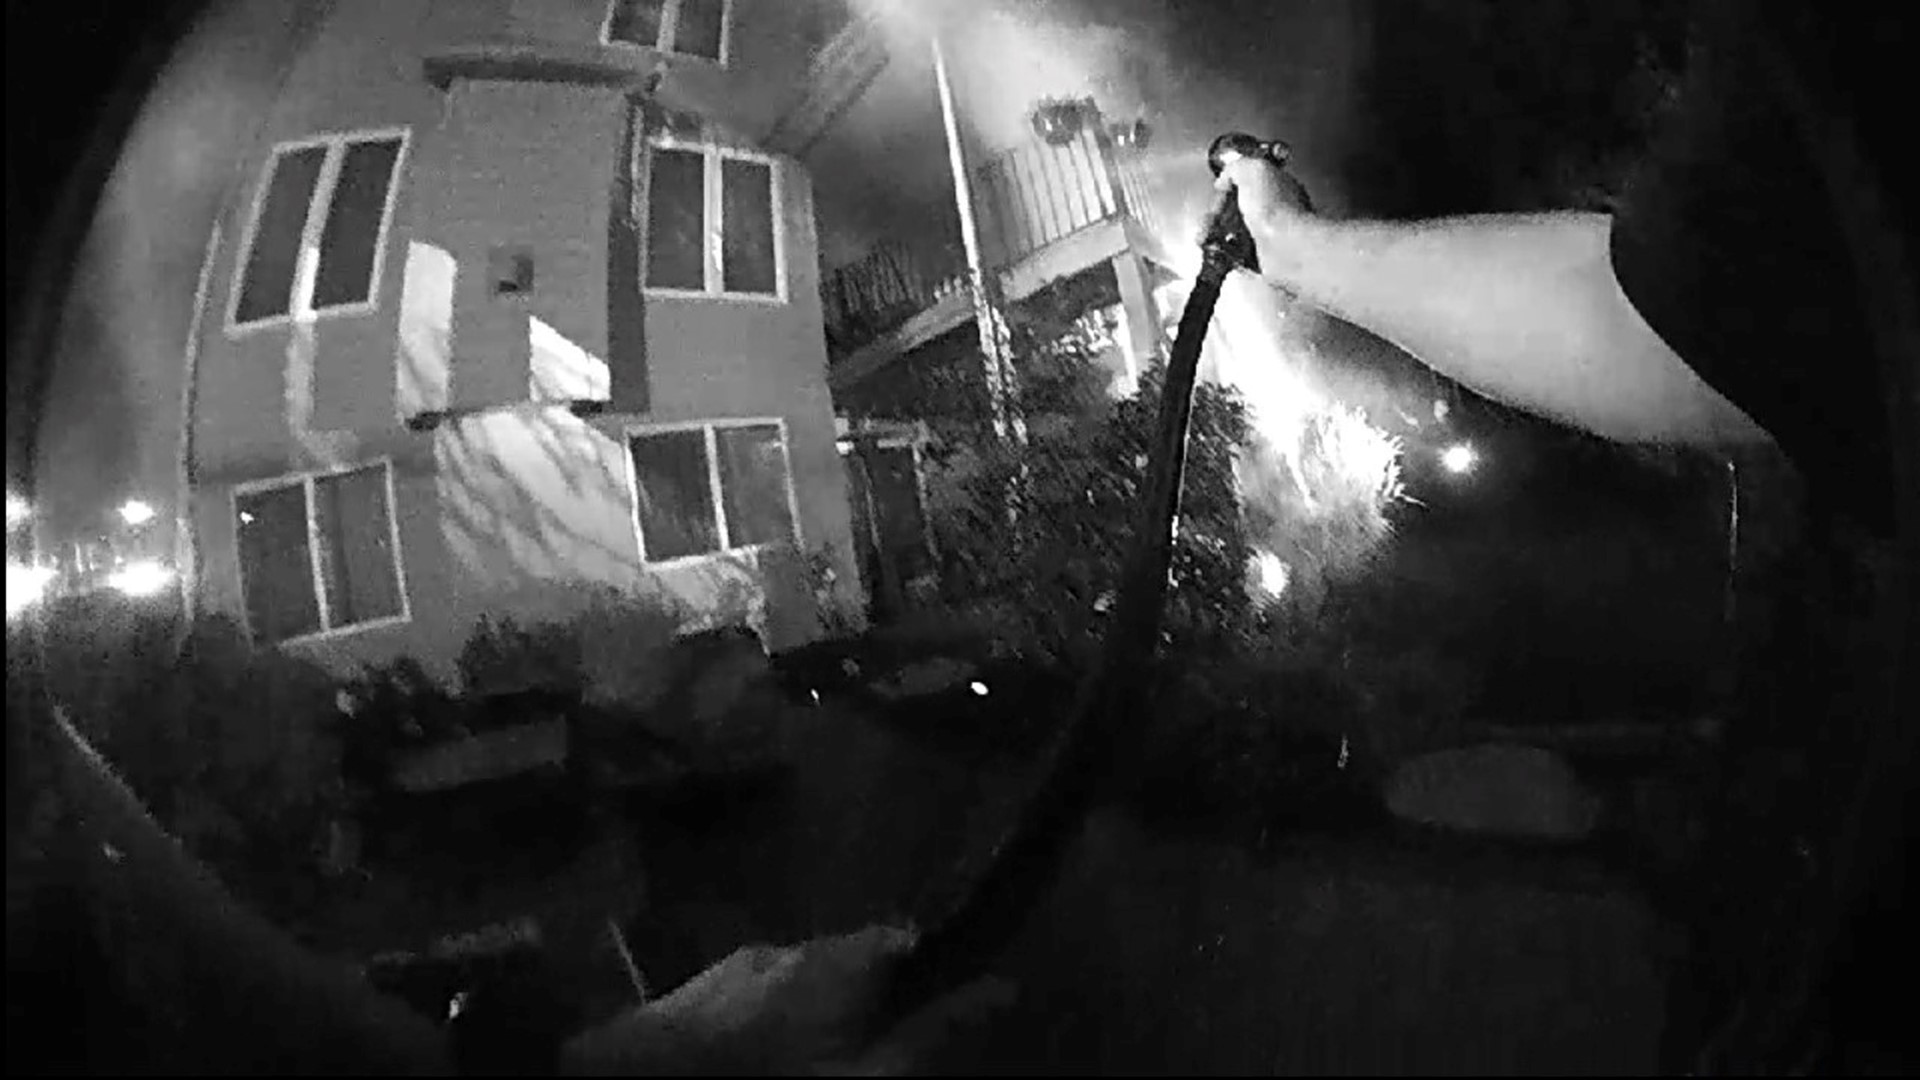 Ofc. Jared Alcorn was out on his neighborhood patrol shift just before 4 a.m. Friday, when he suddenly began to smell smoke.